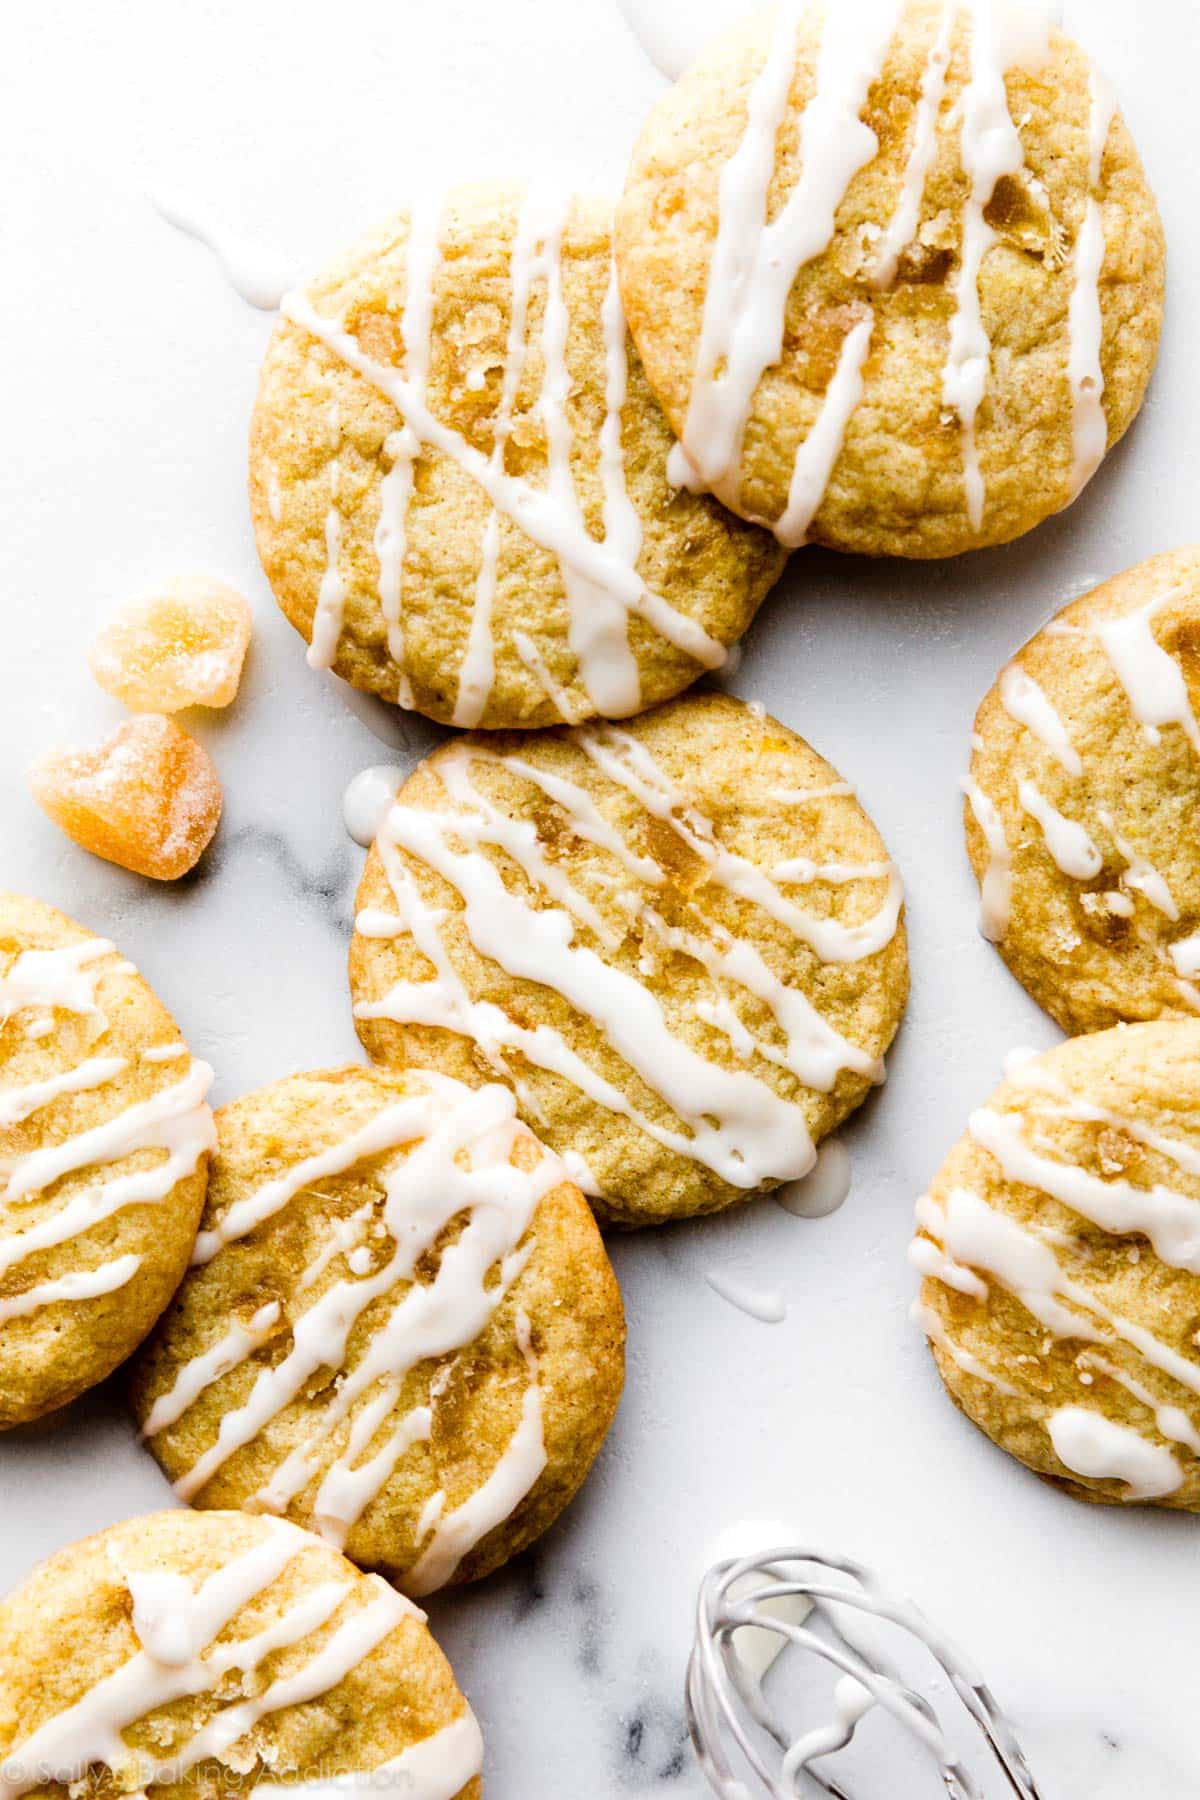 lemon cookies with candied ginger and lemon glaze on top